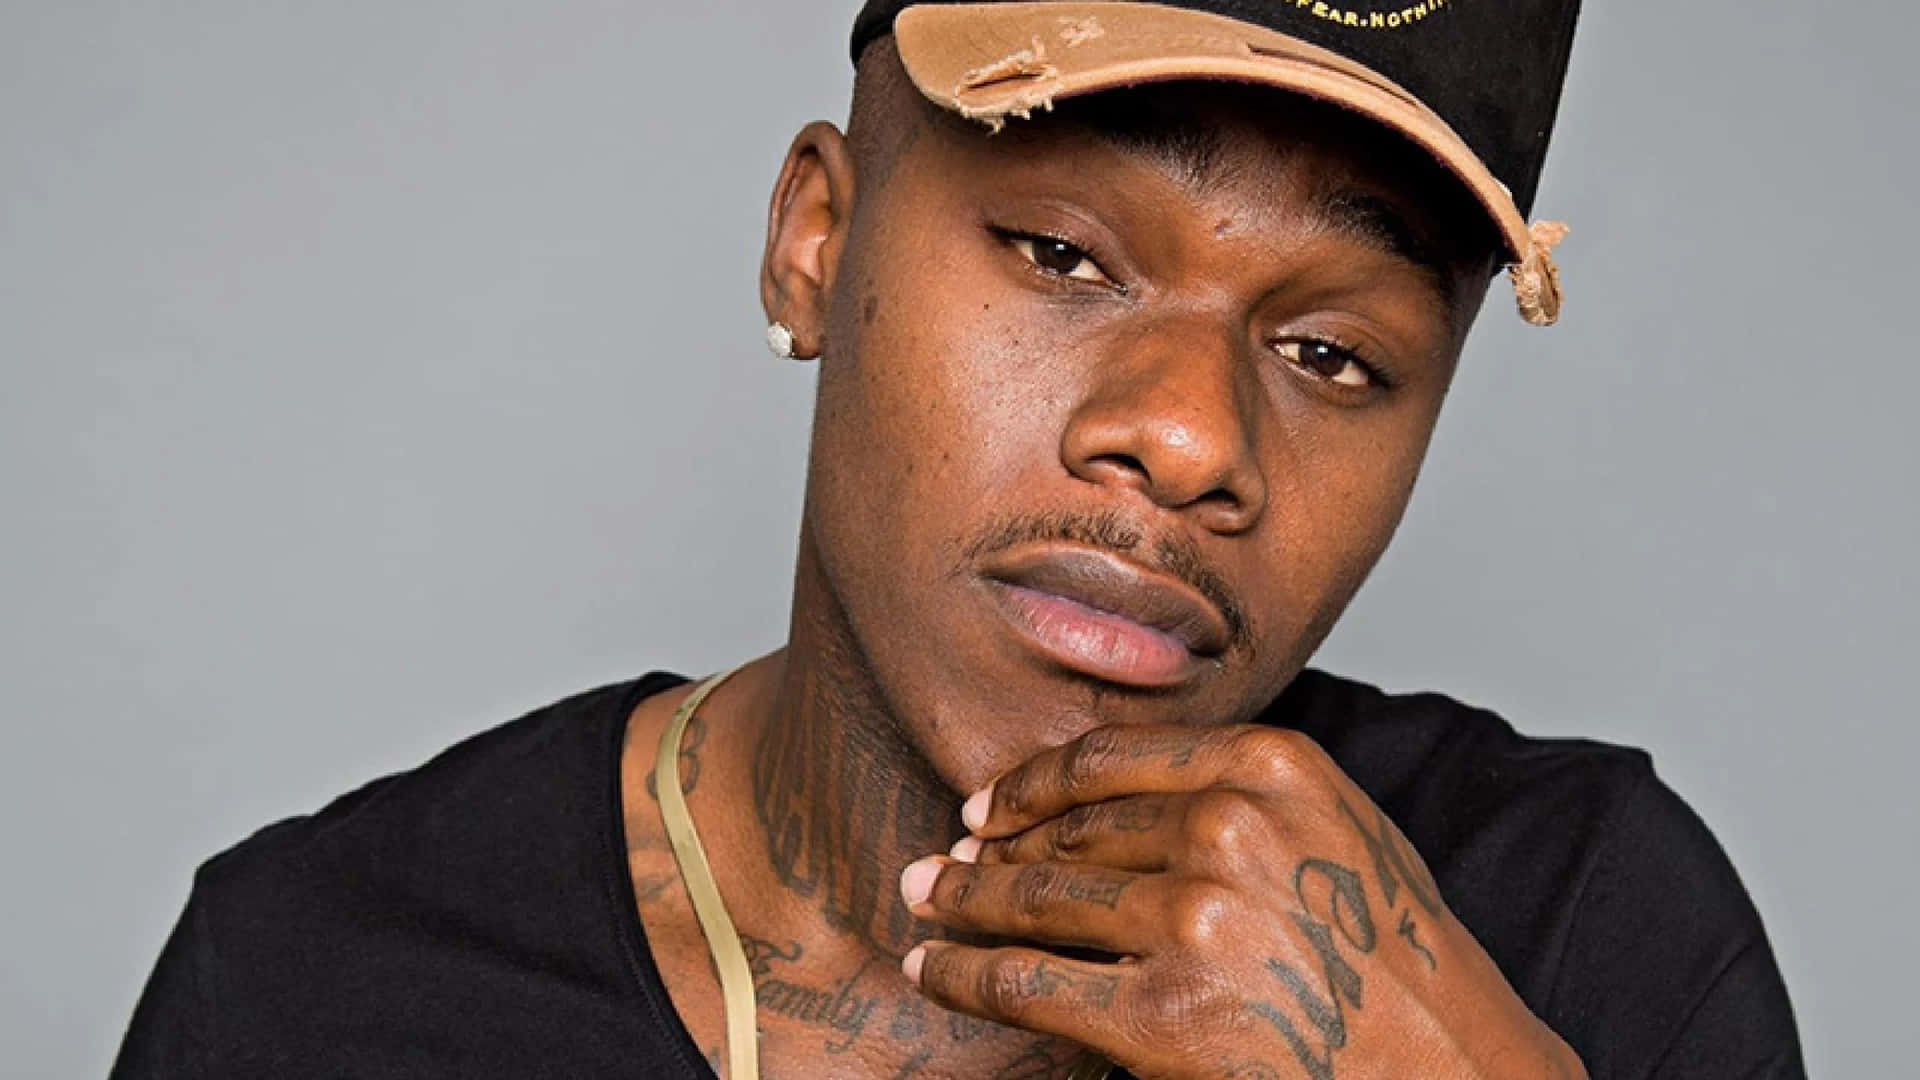 DaBaby Poses in a Stylish Outfit Against a Graffitied Wall